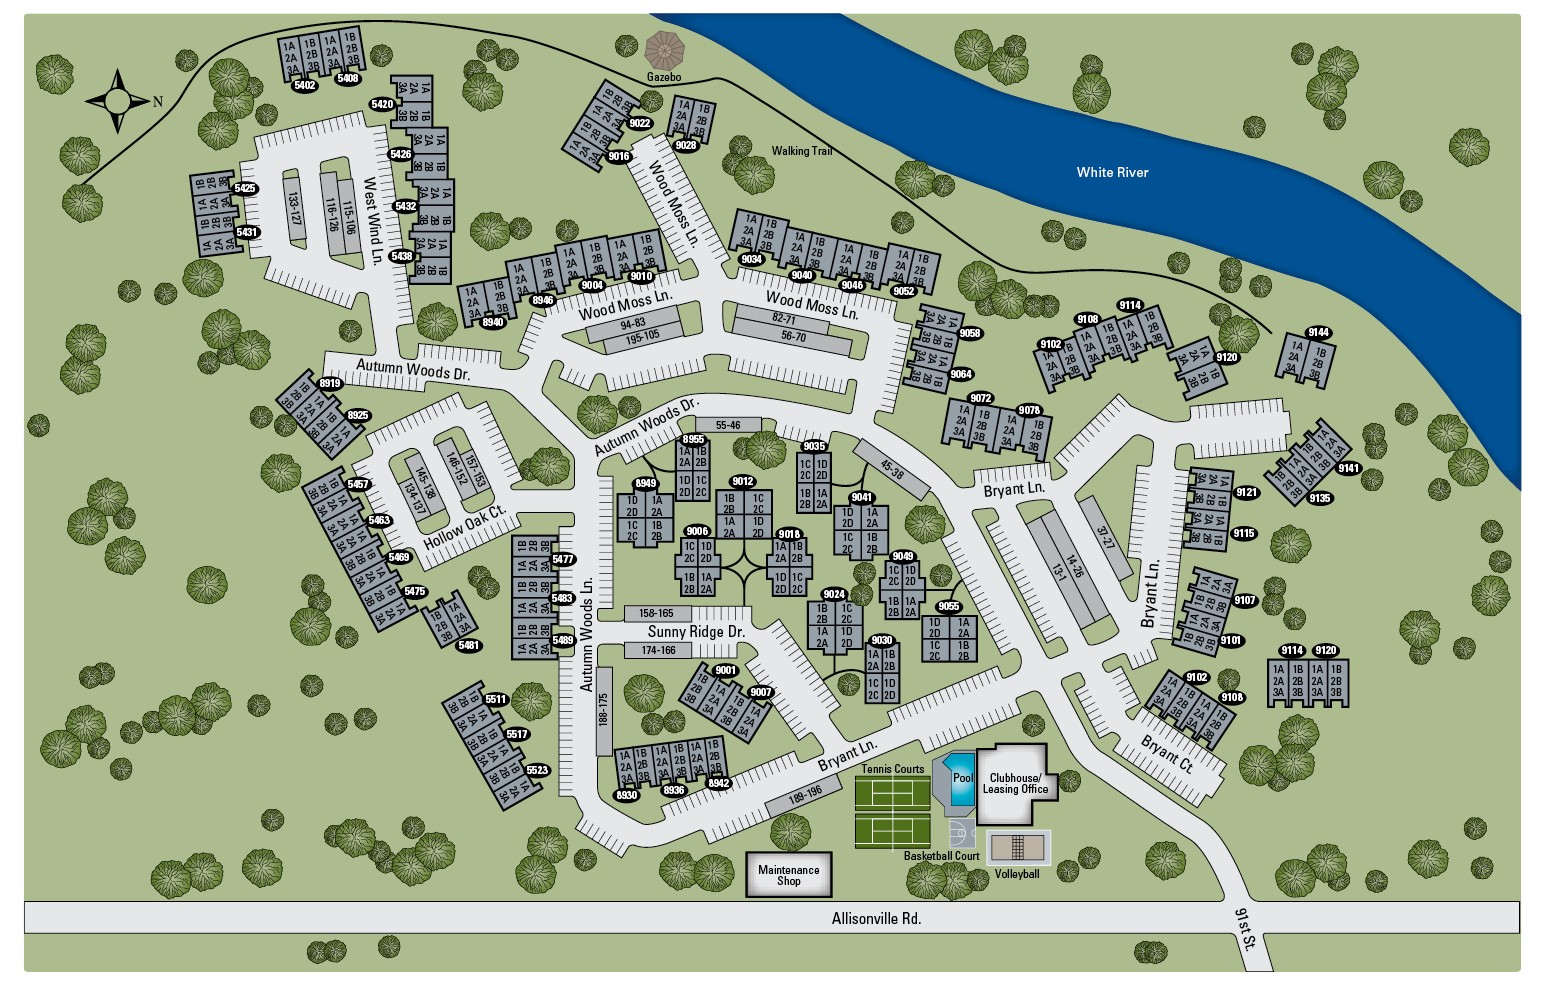 This community map shows the layout of apartments for TGM Autumn Woods Apartments in Indianapolis, IN.